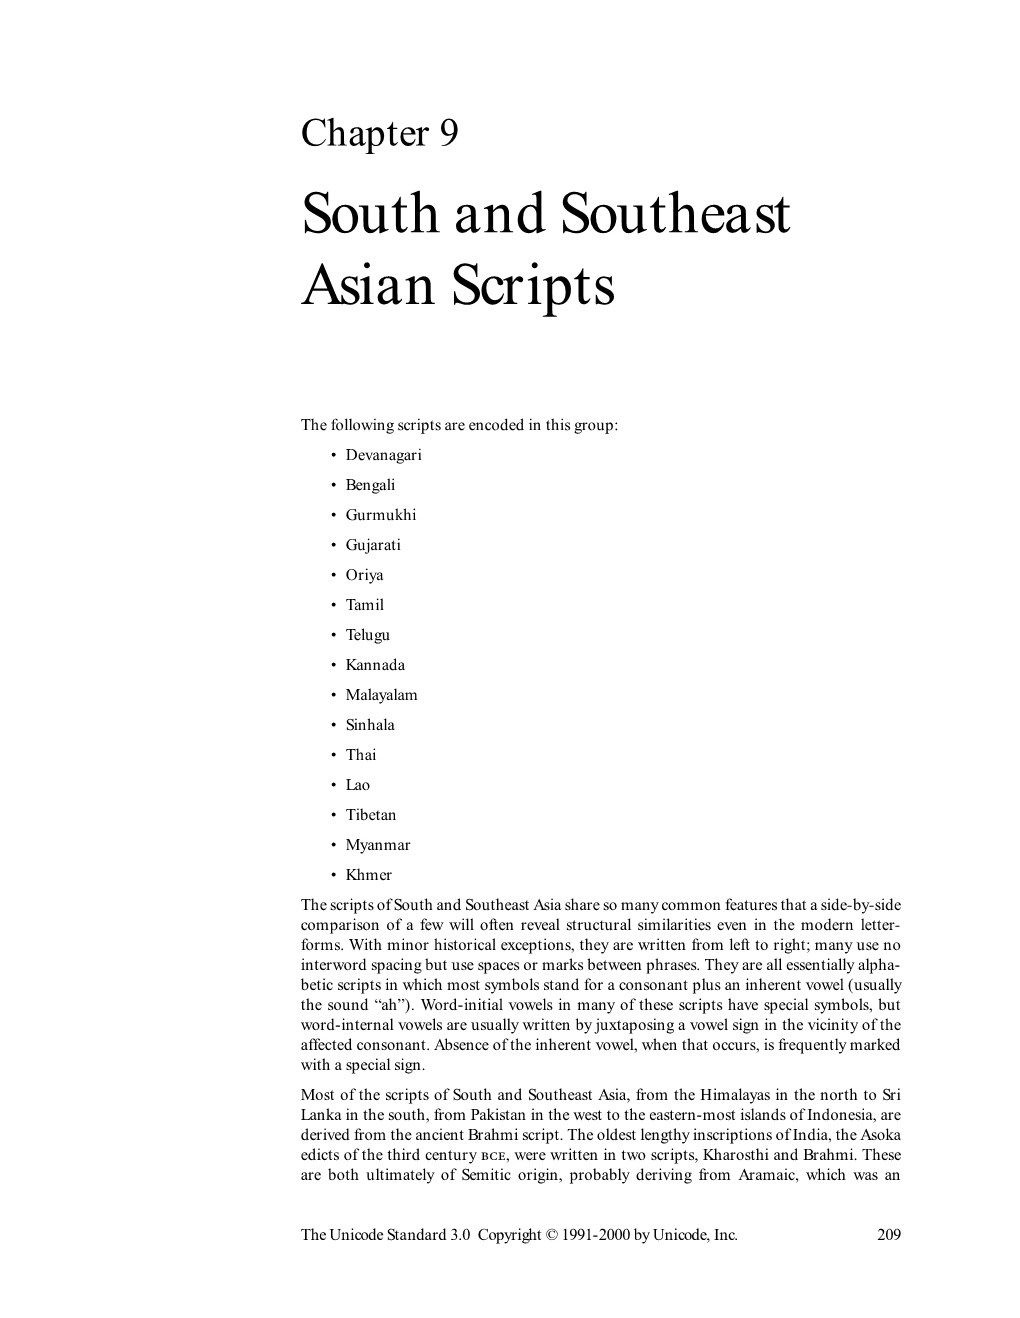 South and Southeast Asian Scripts 9